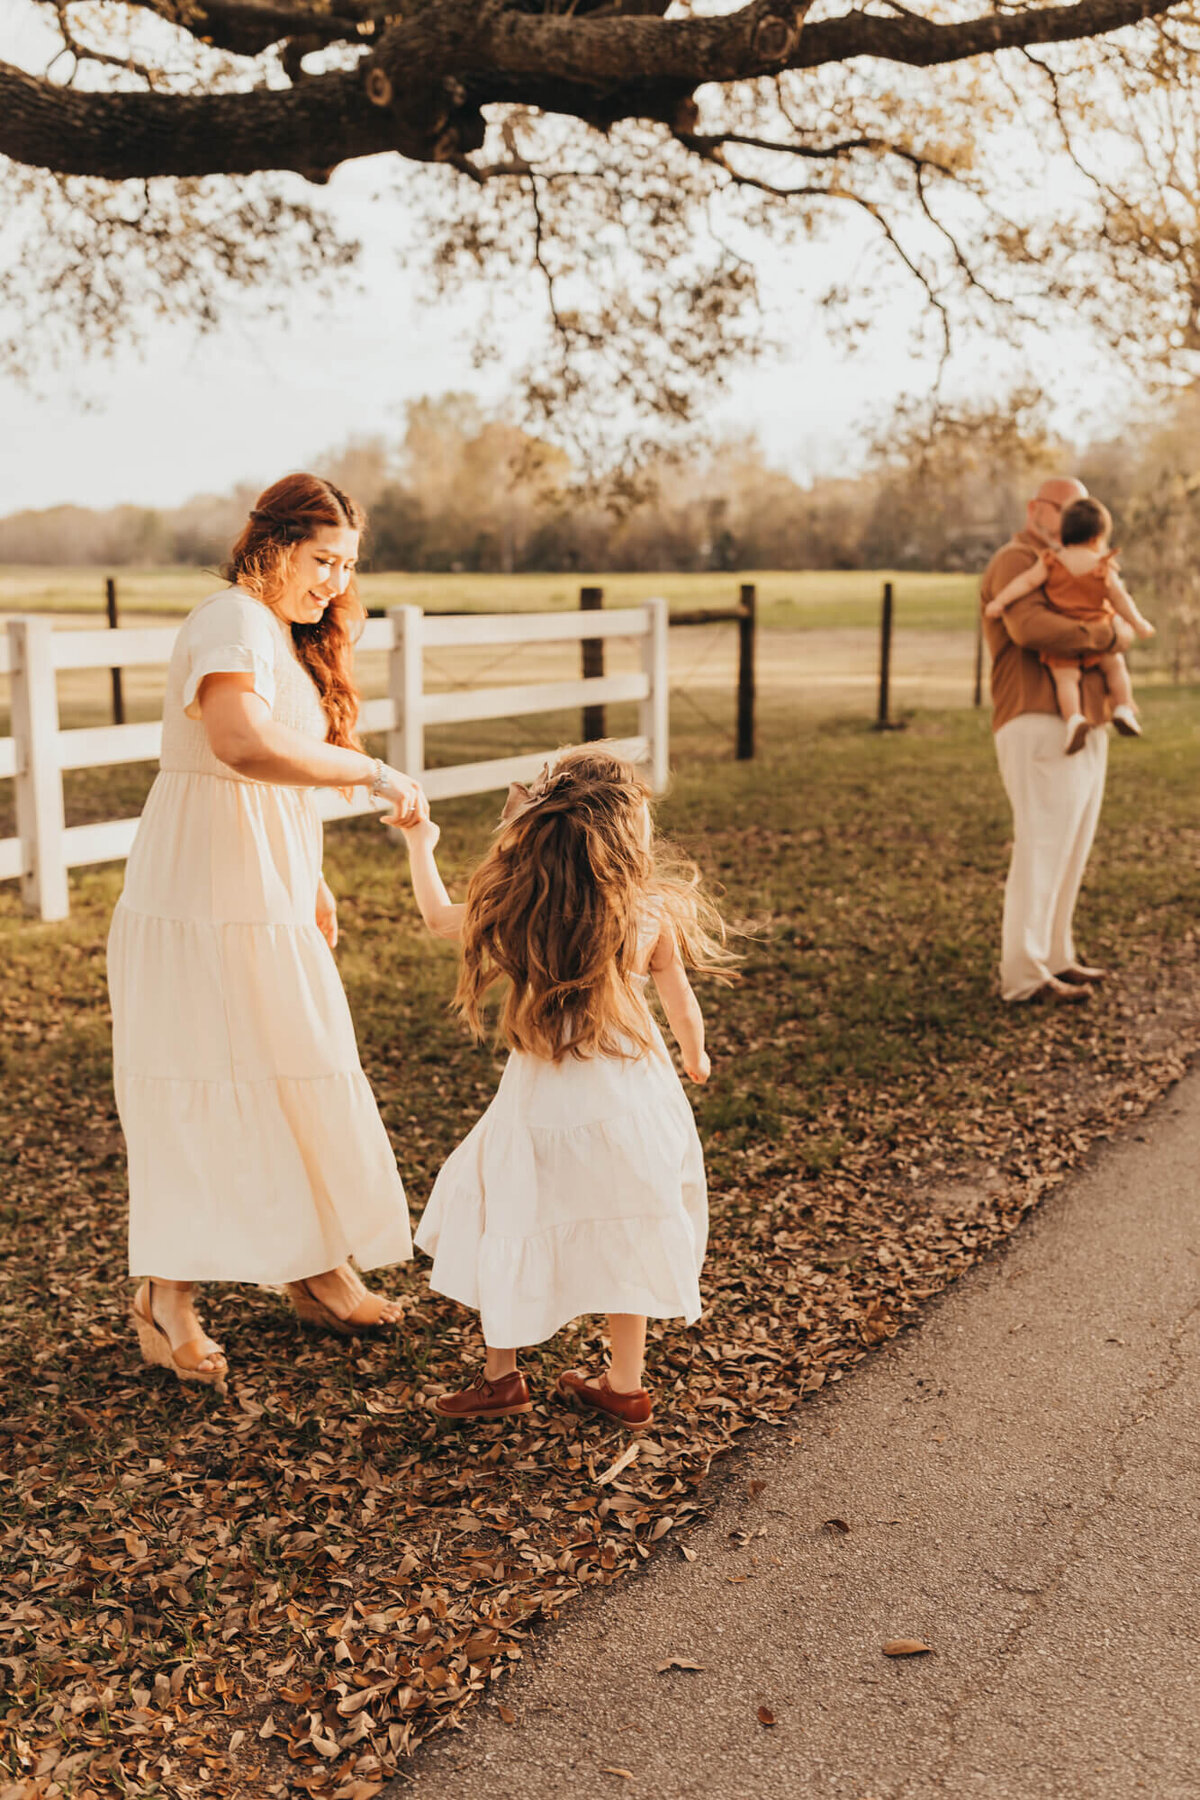 little girl dances with mom while dad holds daughter off to the side of the white picket fence.